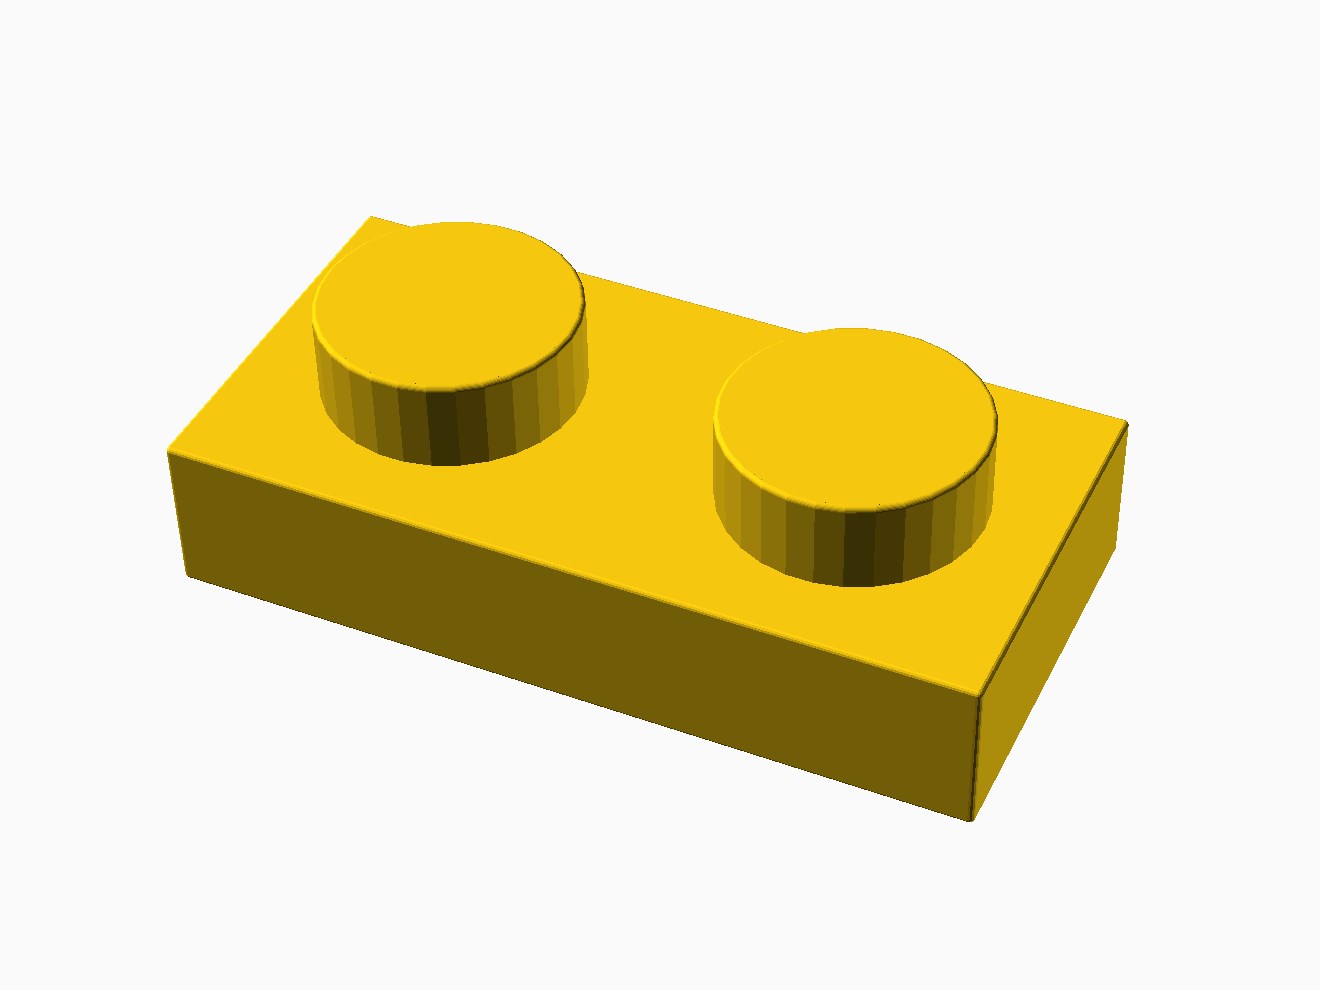 3D printable model of a LEGO 2x1 Plate with standard knobs.